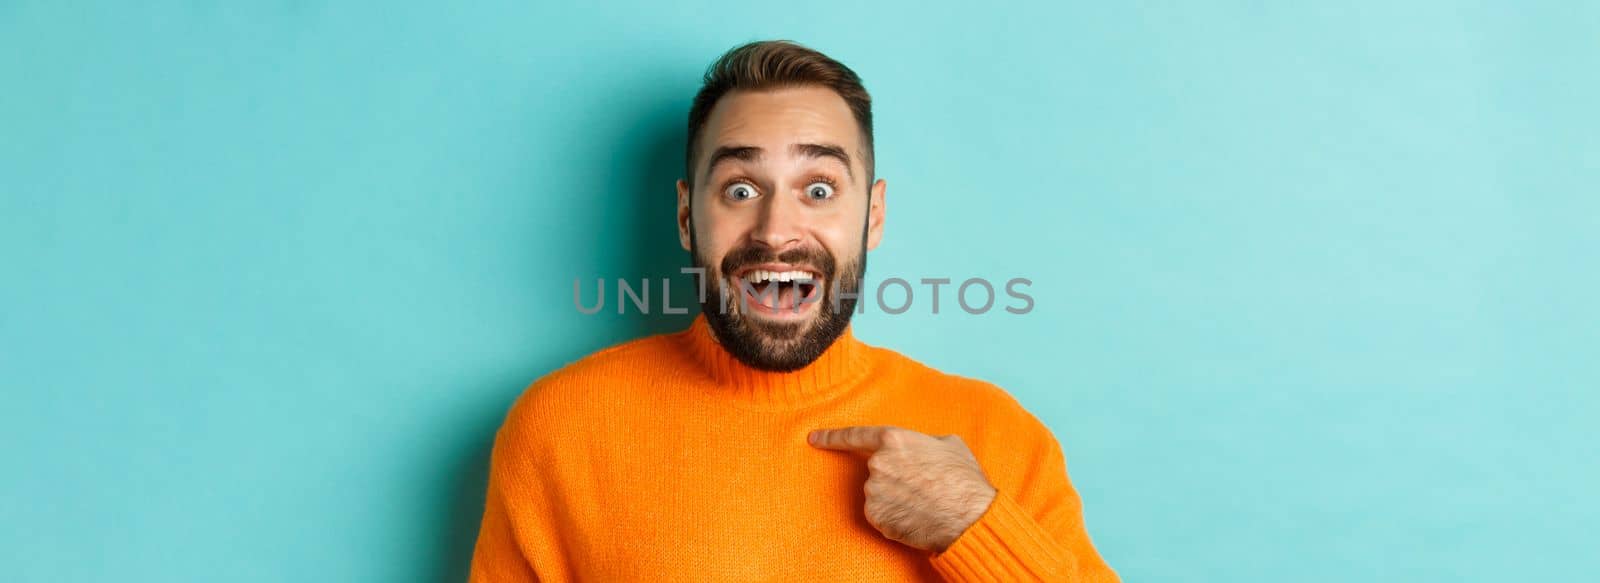 Close-up of happy young man pointing at himself with surprise and excitement, standing over light blue background.